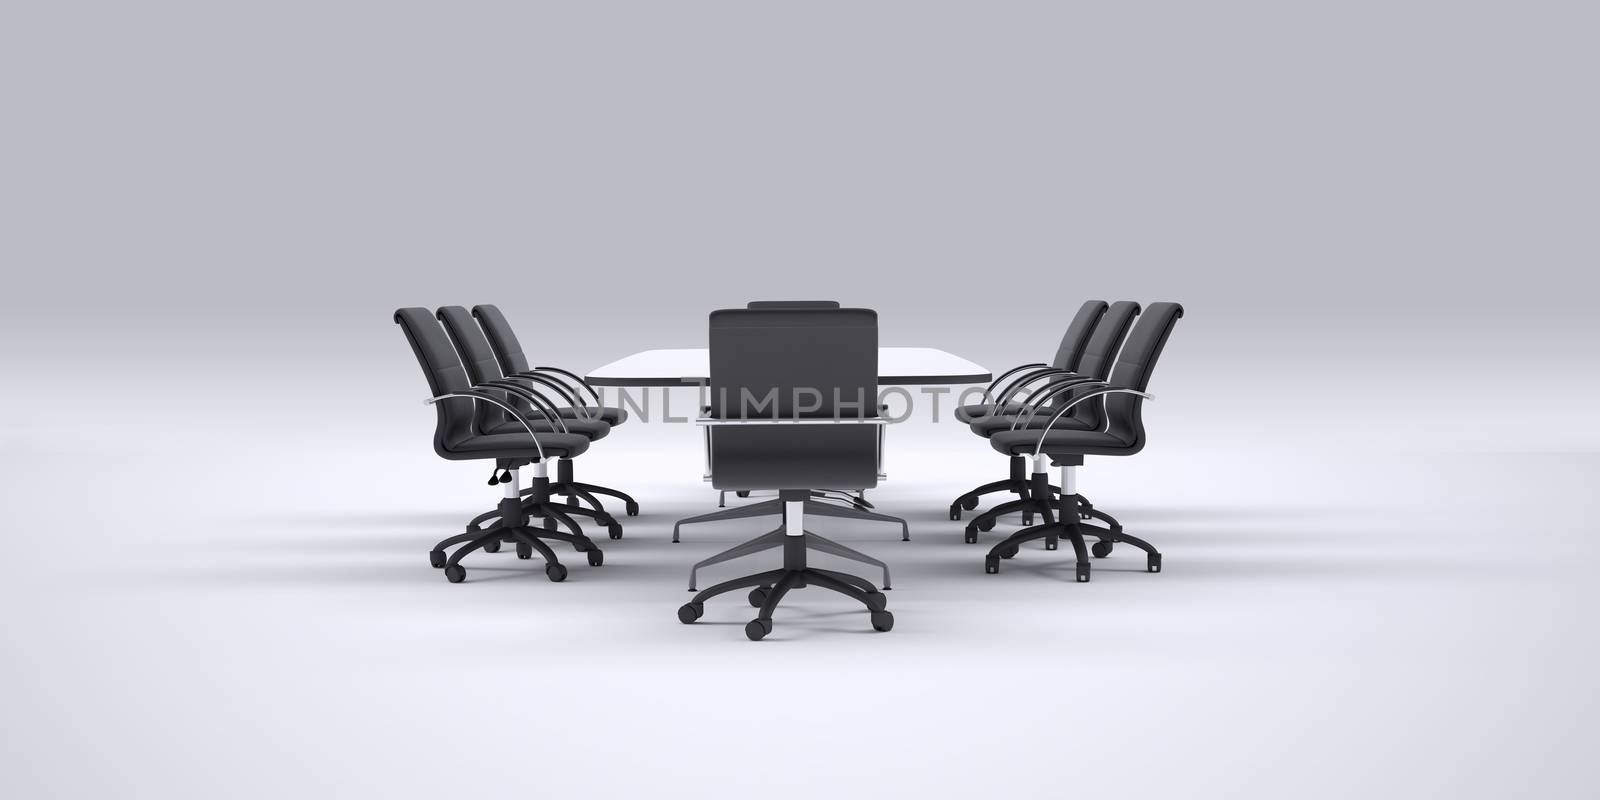 Conference table and office chairs by cherezoff